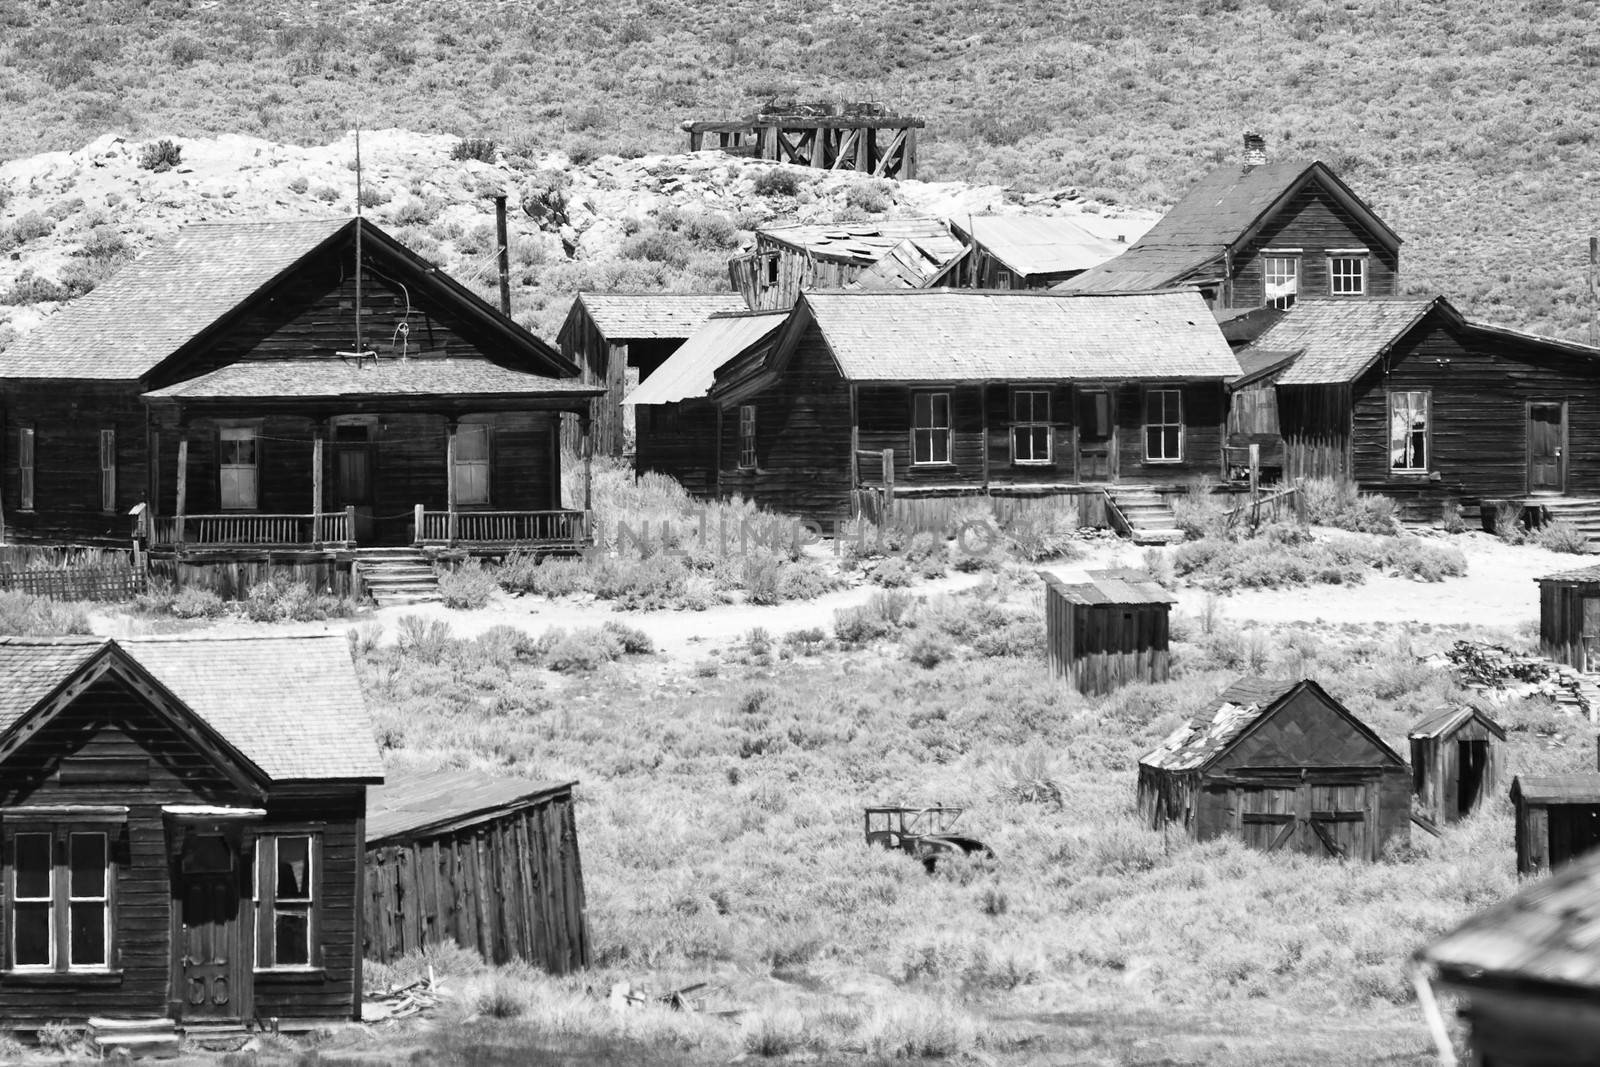 The Bodie State Historic Park, a genuine California gold-mining ghost town.